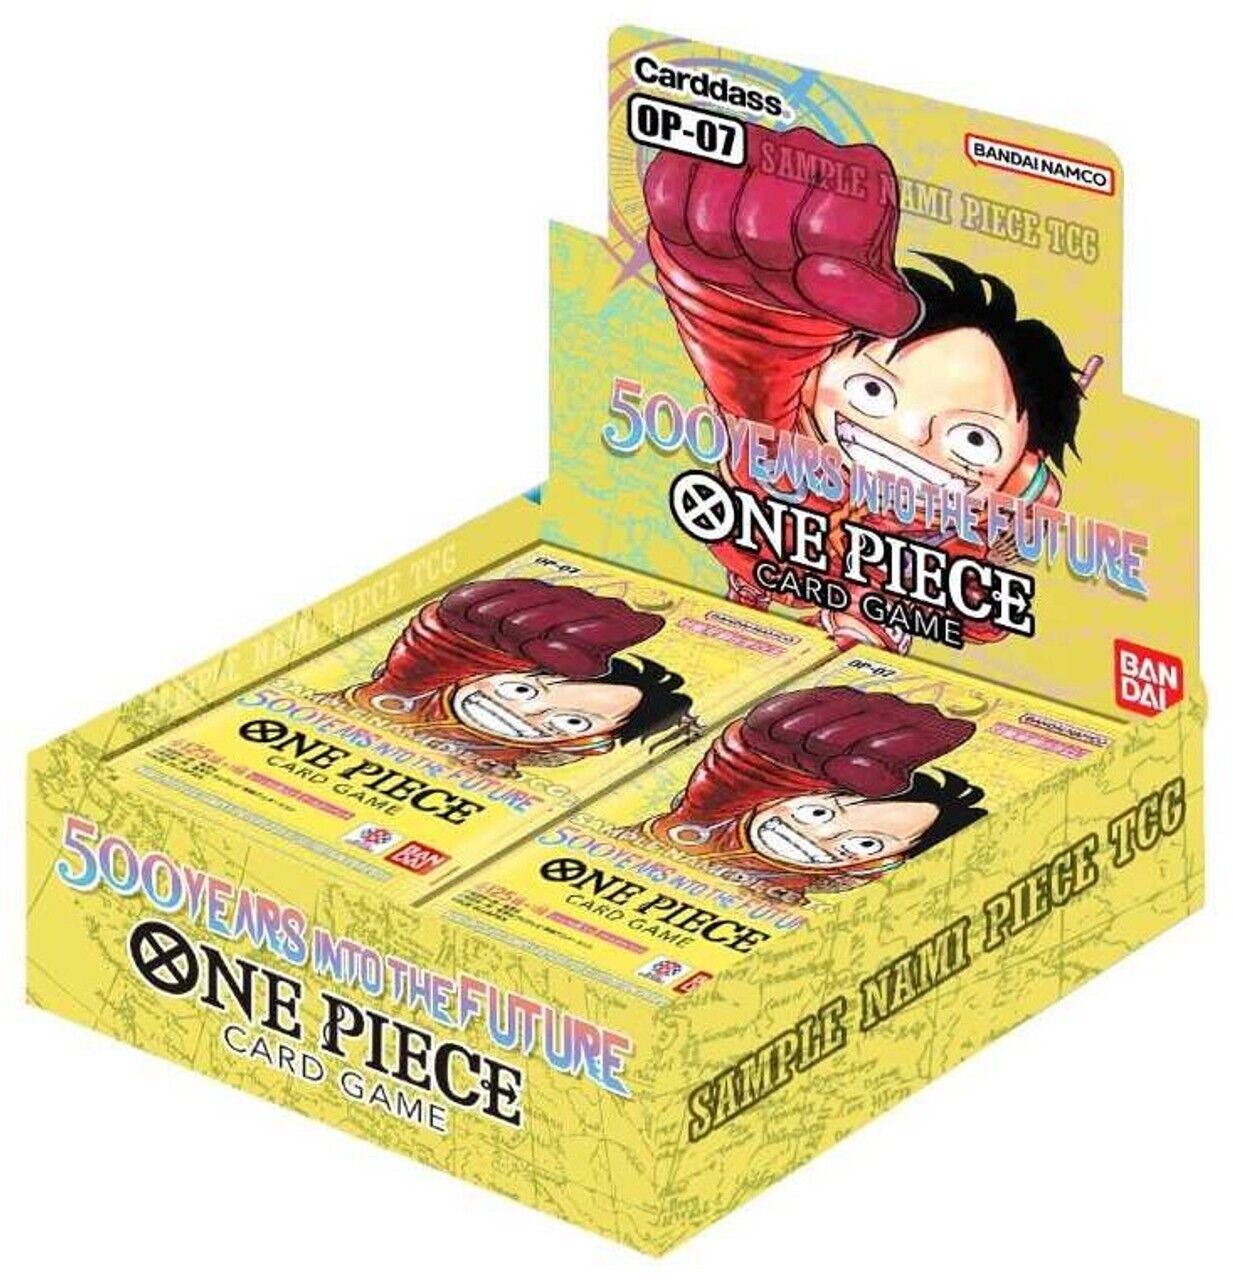 One Piece TCG: 500 Years in the Future Booster Box [OP-07]